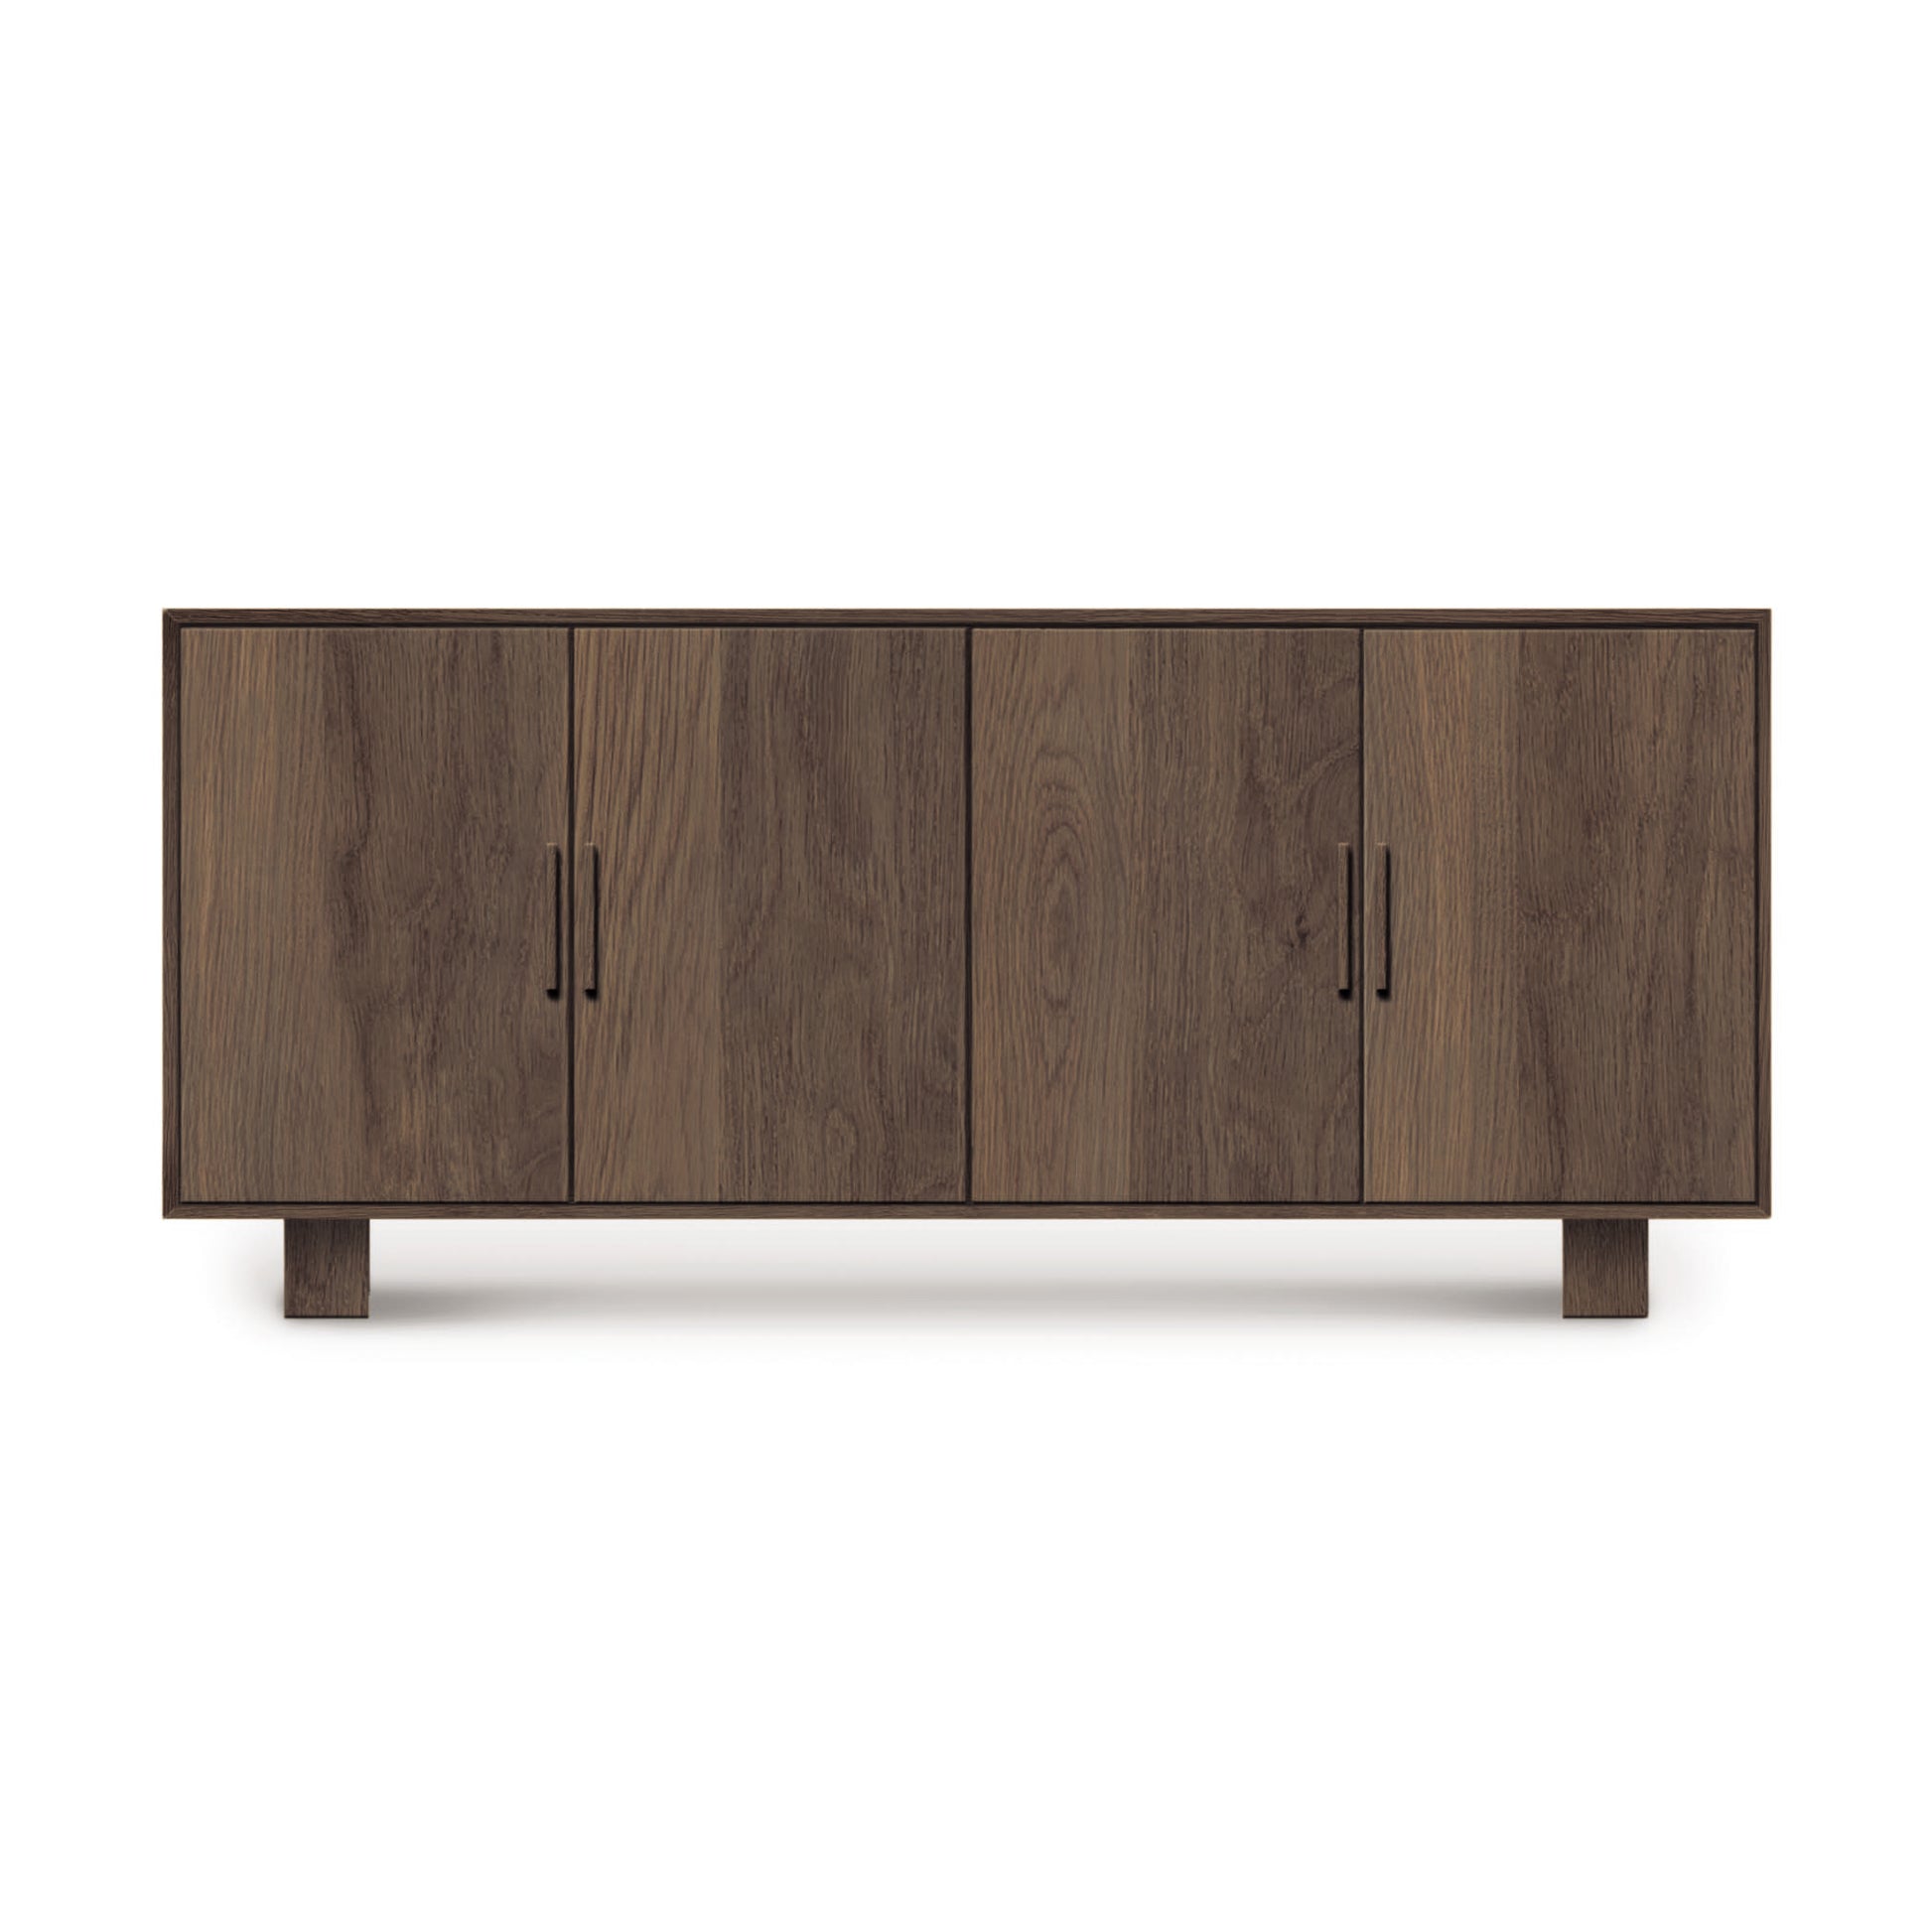 A mid-century modern, wooden Iso 4-Door Buffet with closed cabinets, featuring a simple design with visible wood grain, positioned against a white background by Copeland Furniture.